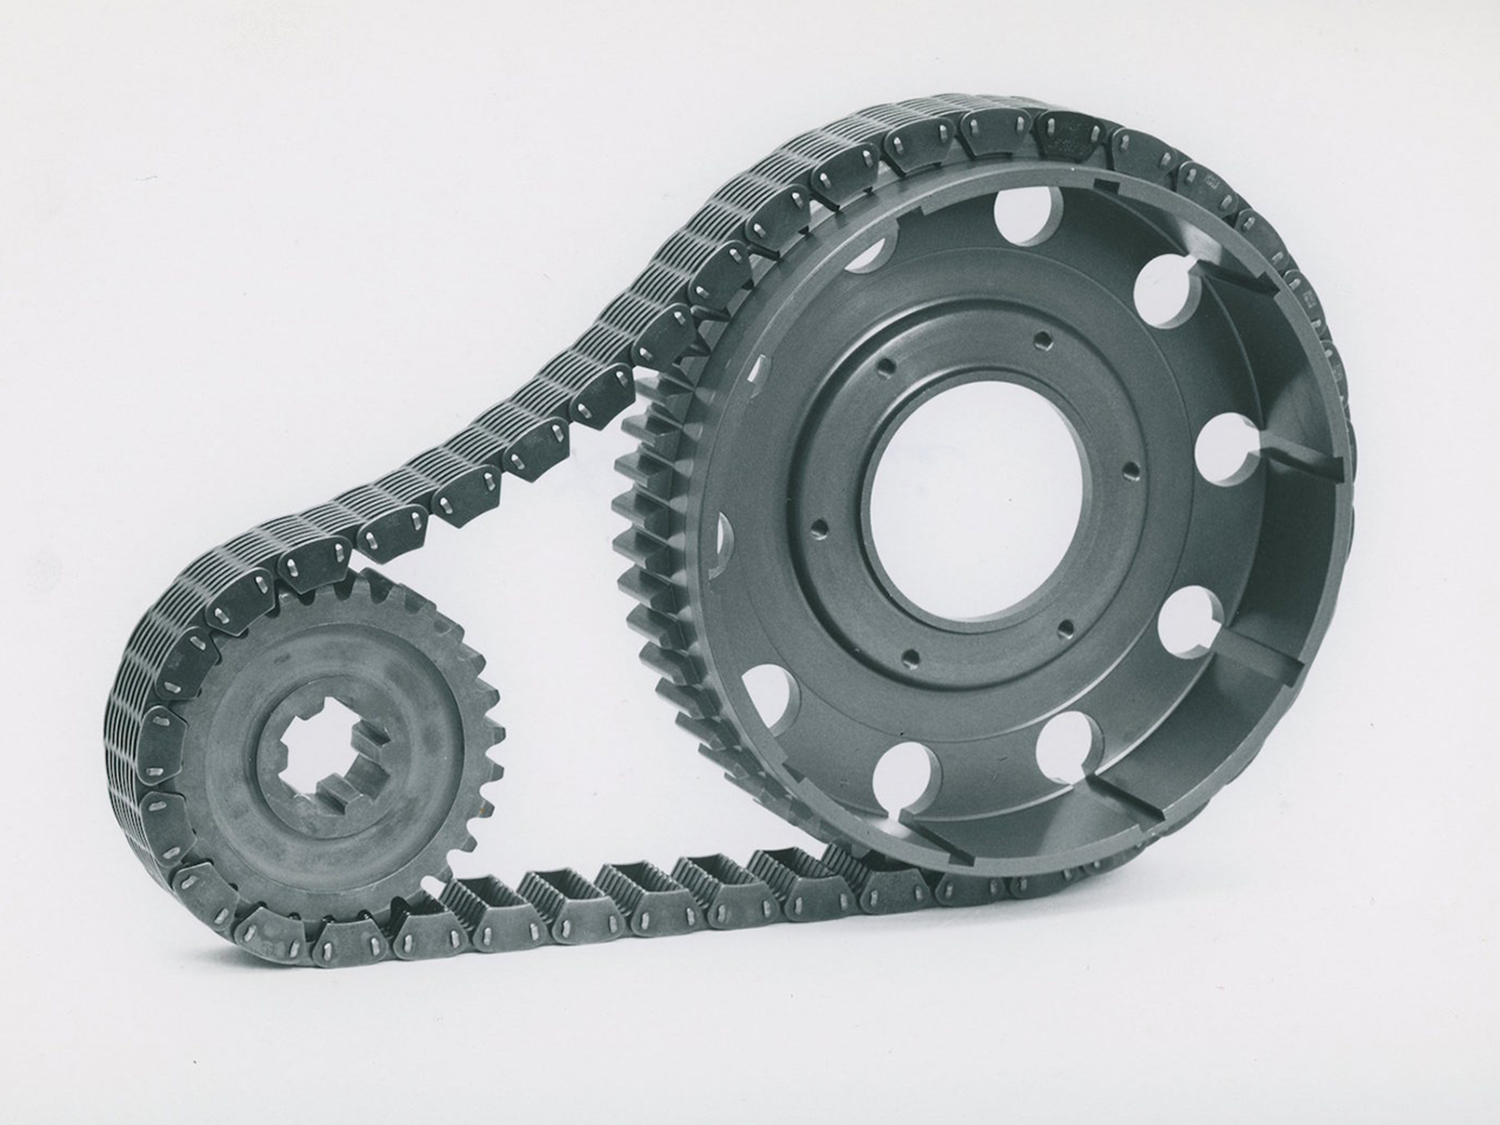 Details about   New Morse Chain HY-VO with 1 3/16” Pitch 